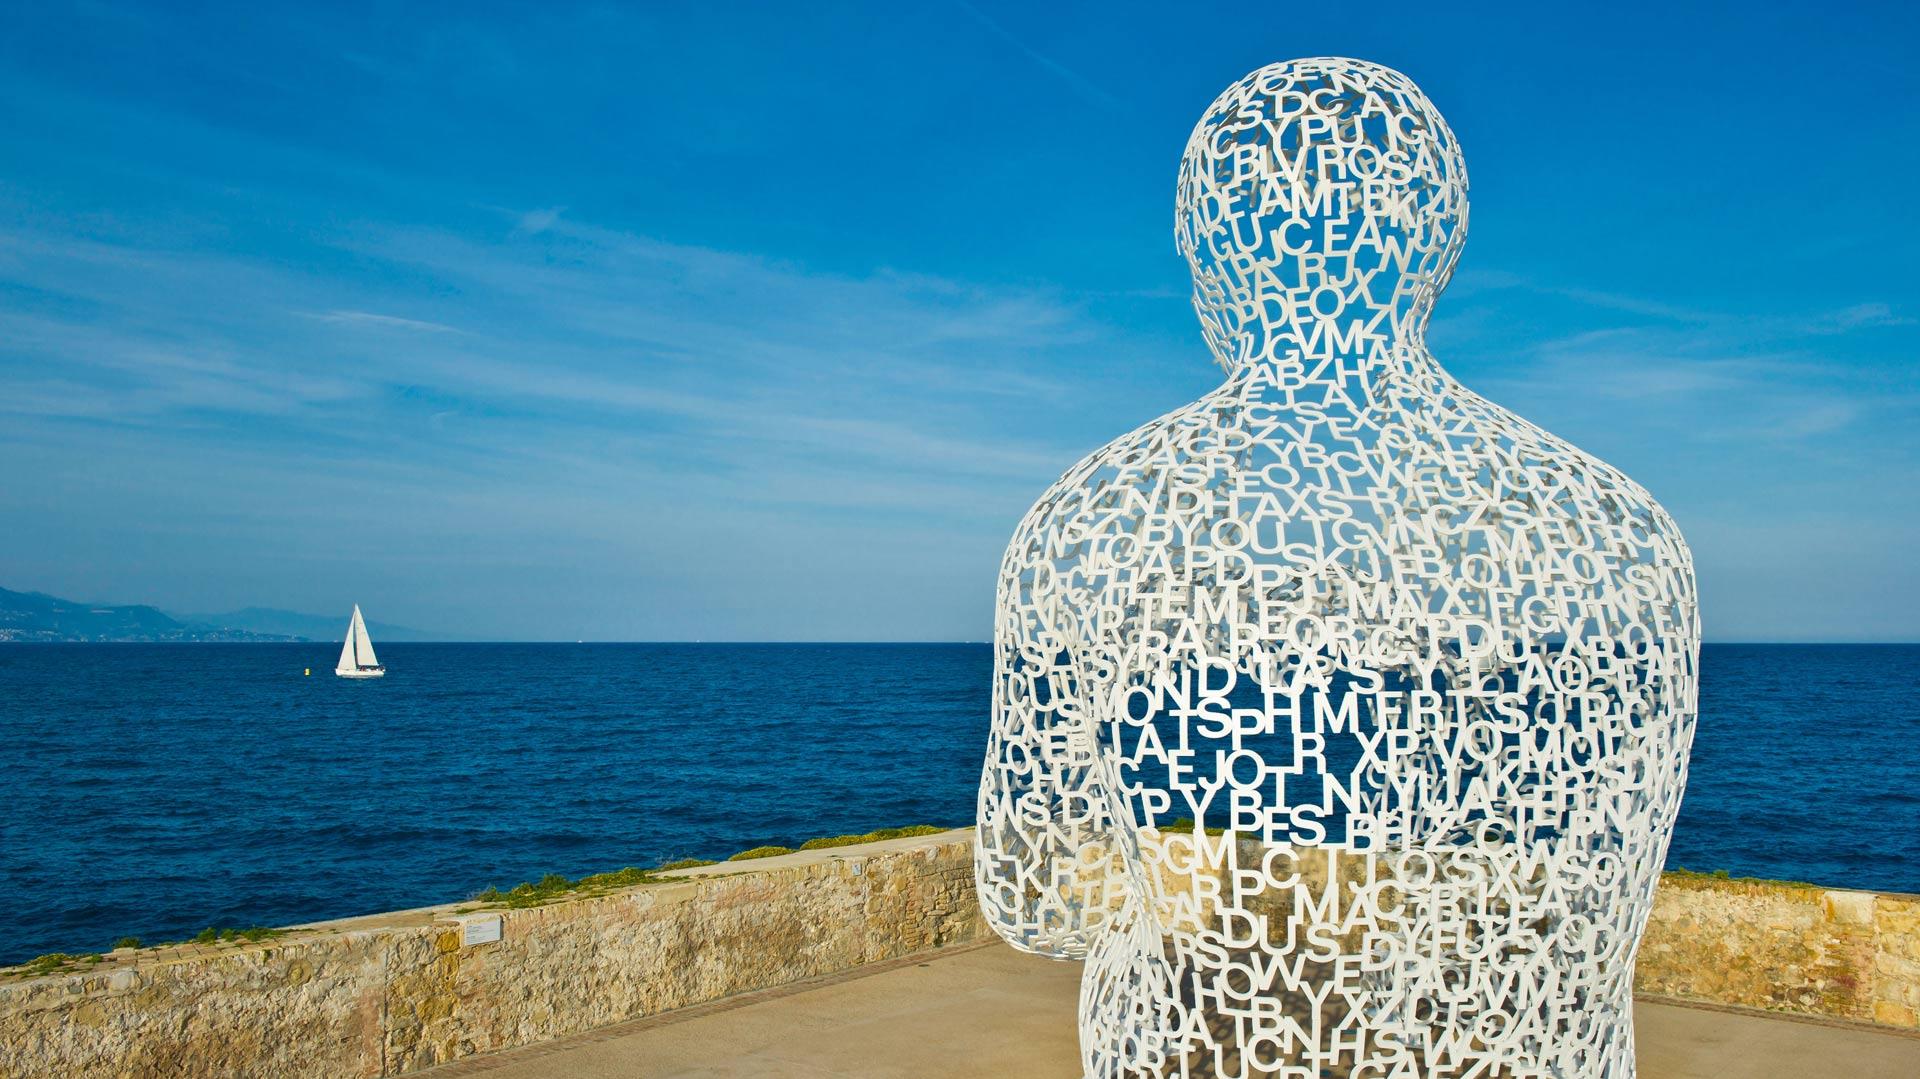 Wallpaper of an Antibes Nomade sculpture by Jaume Plensa which sits atop a restored waterfront fort